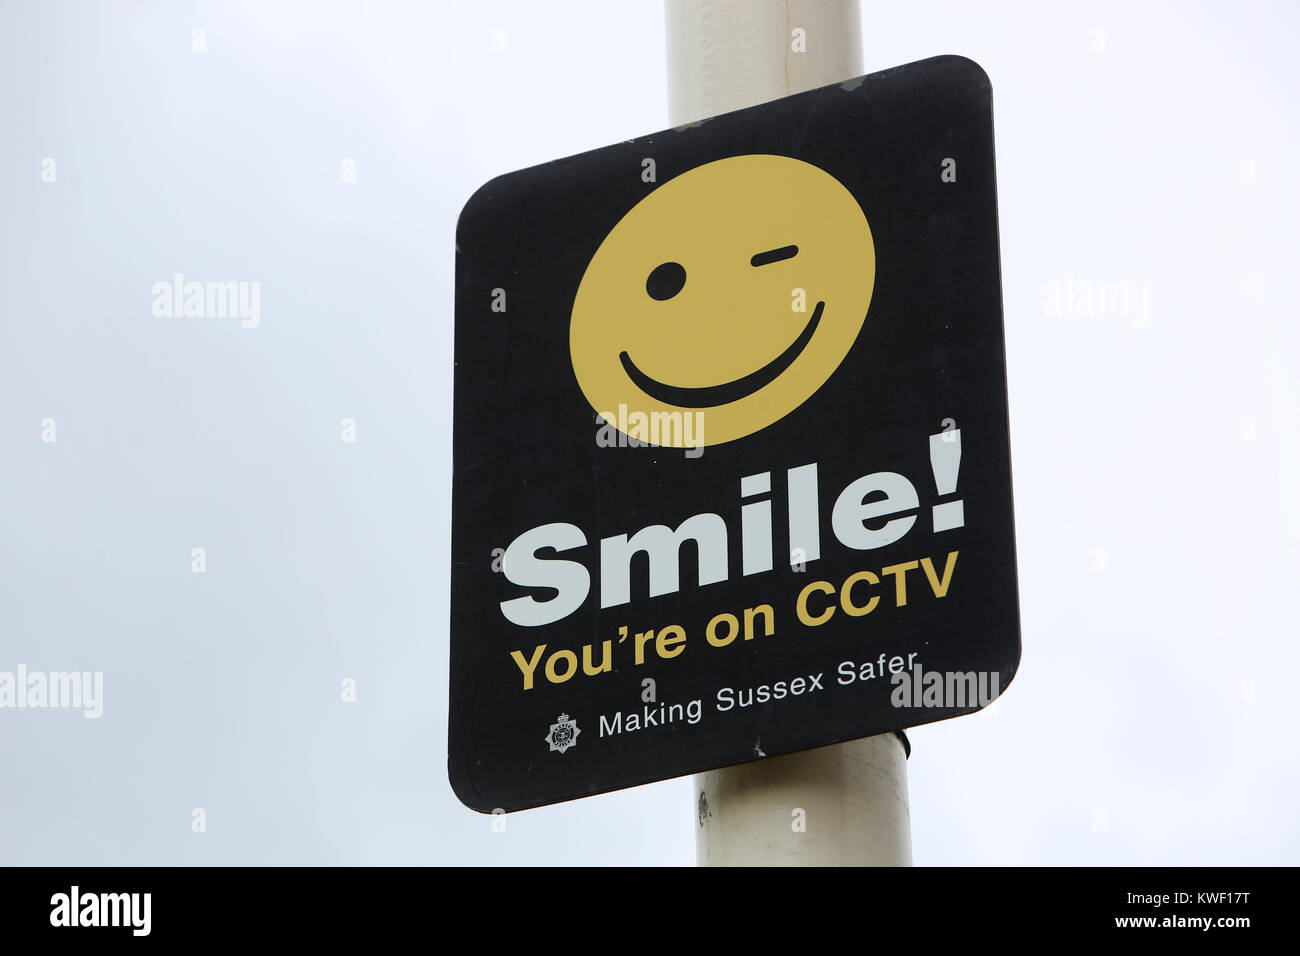 A Smile You're on CCTV sign pictured in Chichester, West Sussex, UK. Stock Photo